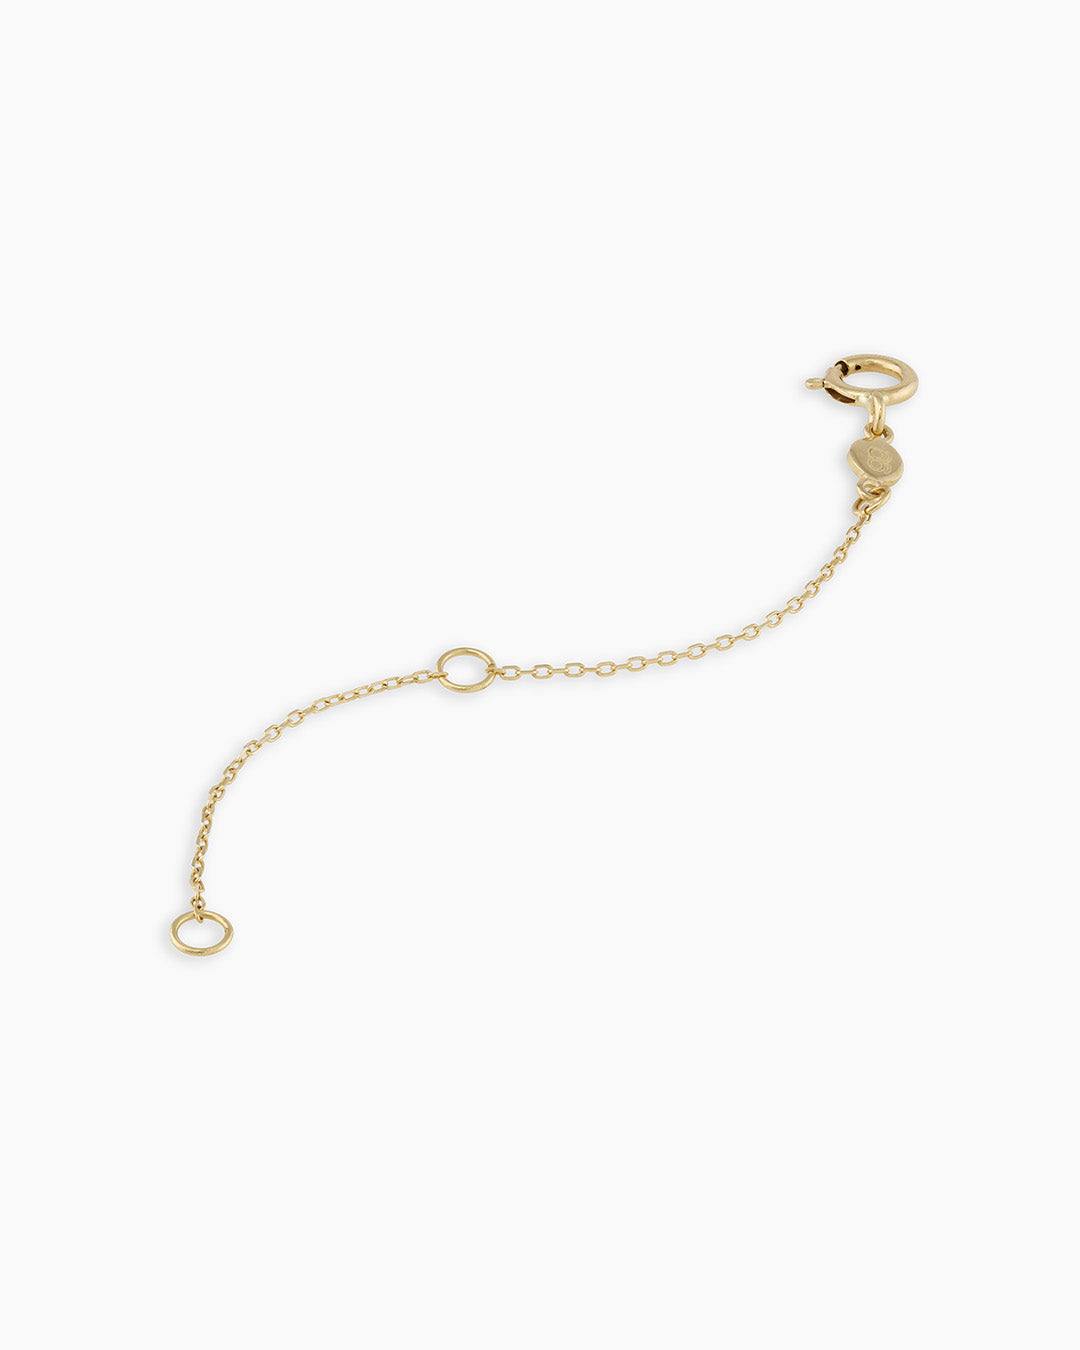 Necklace Chain Extender, Jewelry Extension Gold – AMYO Jewelry